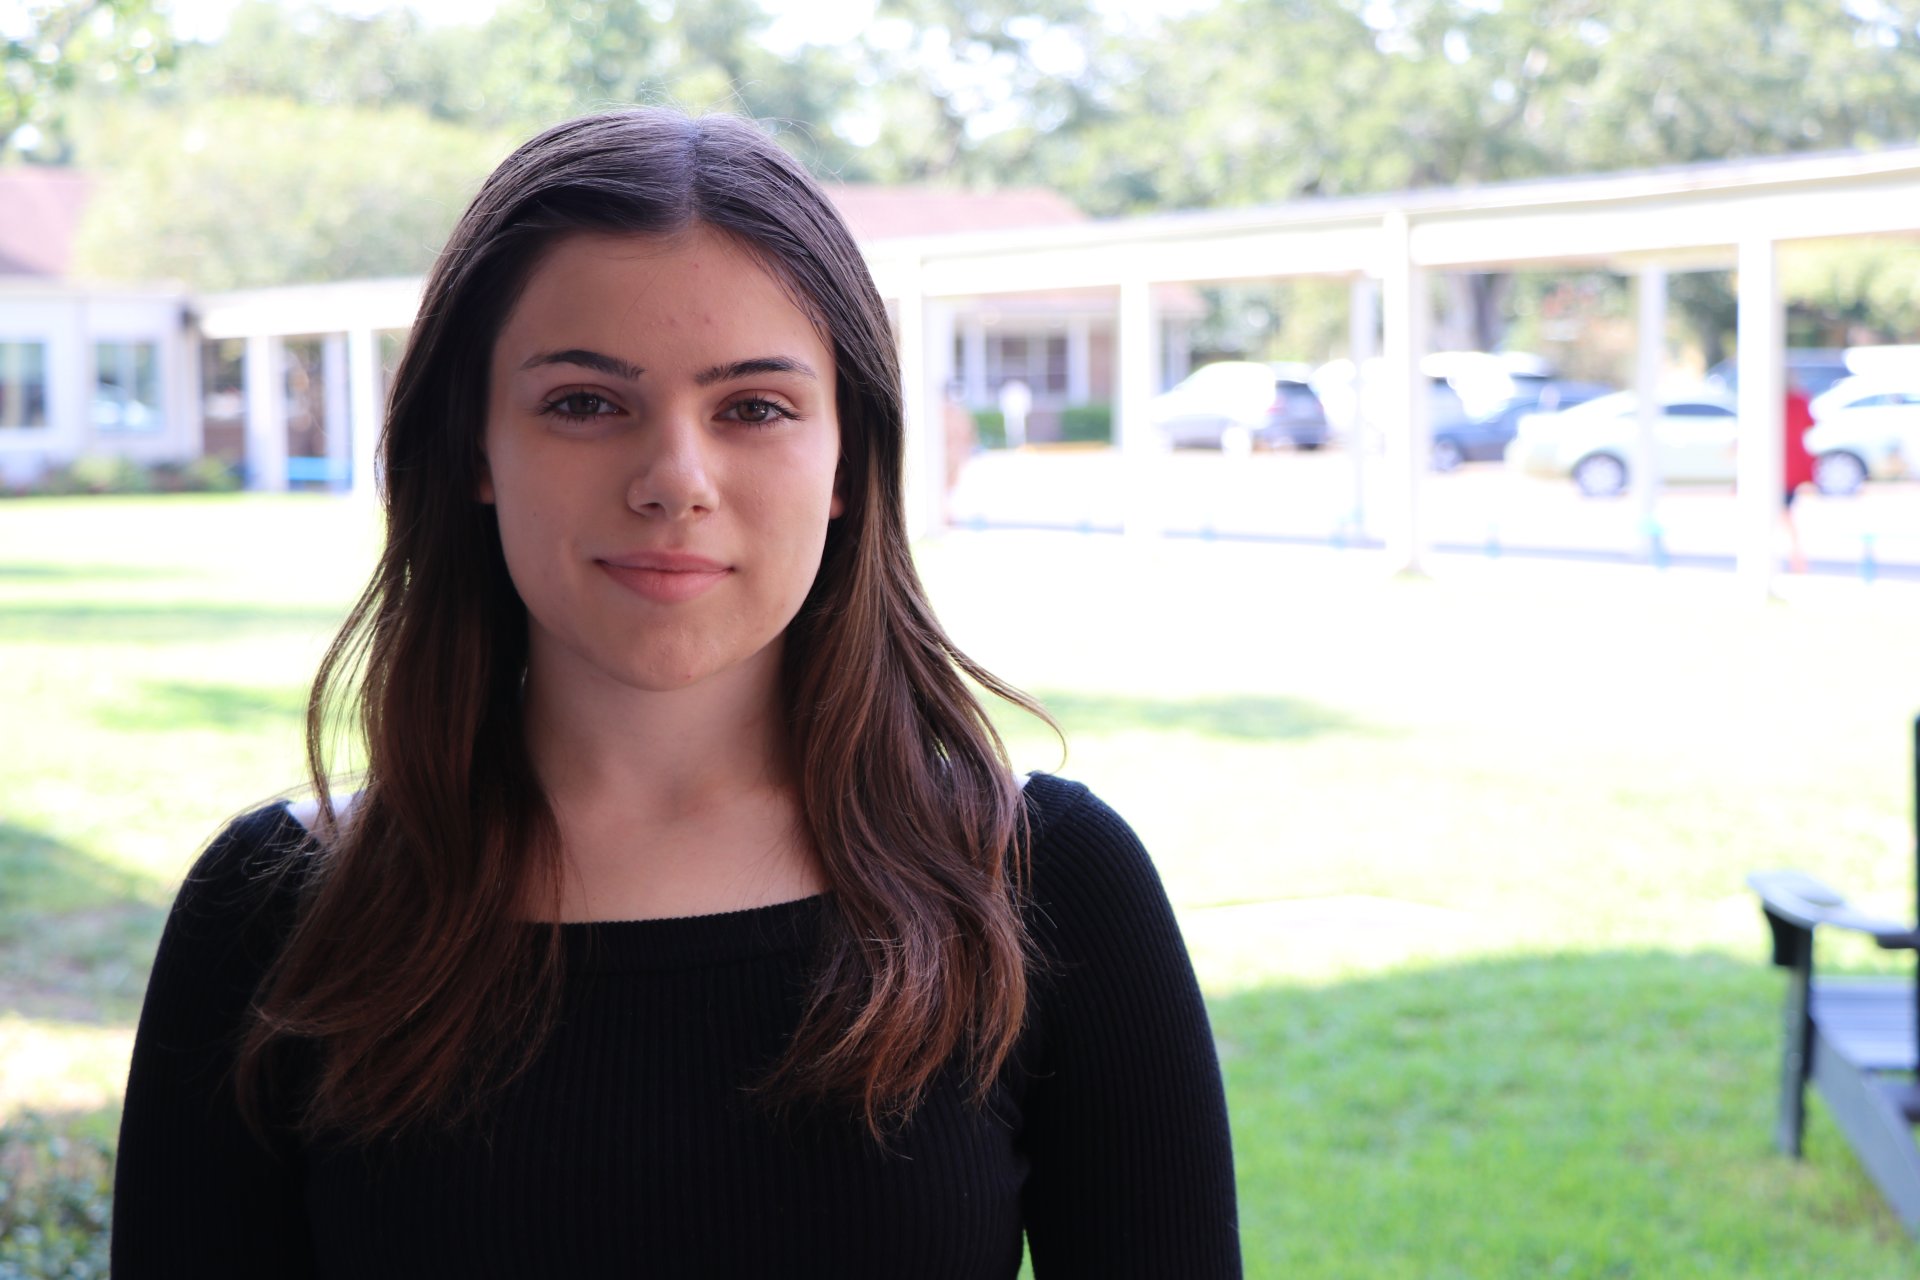 A Supportive Community “St. Martin’s curates a small, intimate sense of community... There are so many opportunities to become closer with each other through clubs, sports, and afterschool activities.” Gloria Ruiz ’24